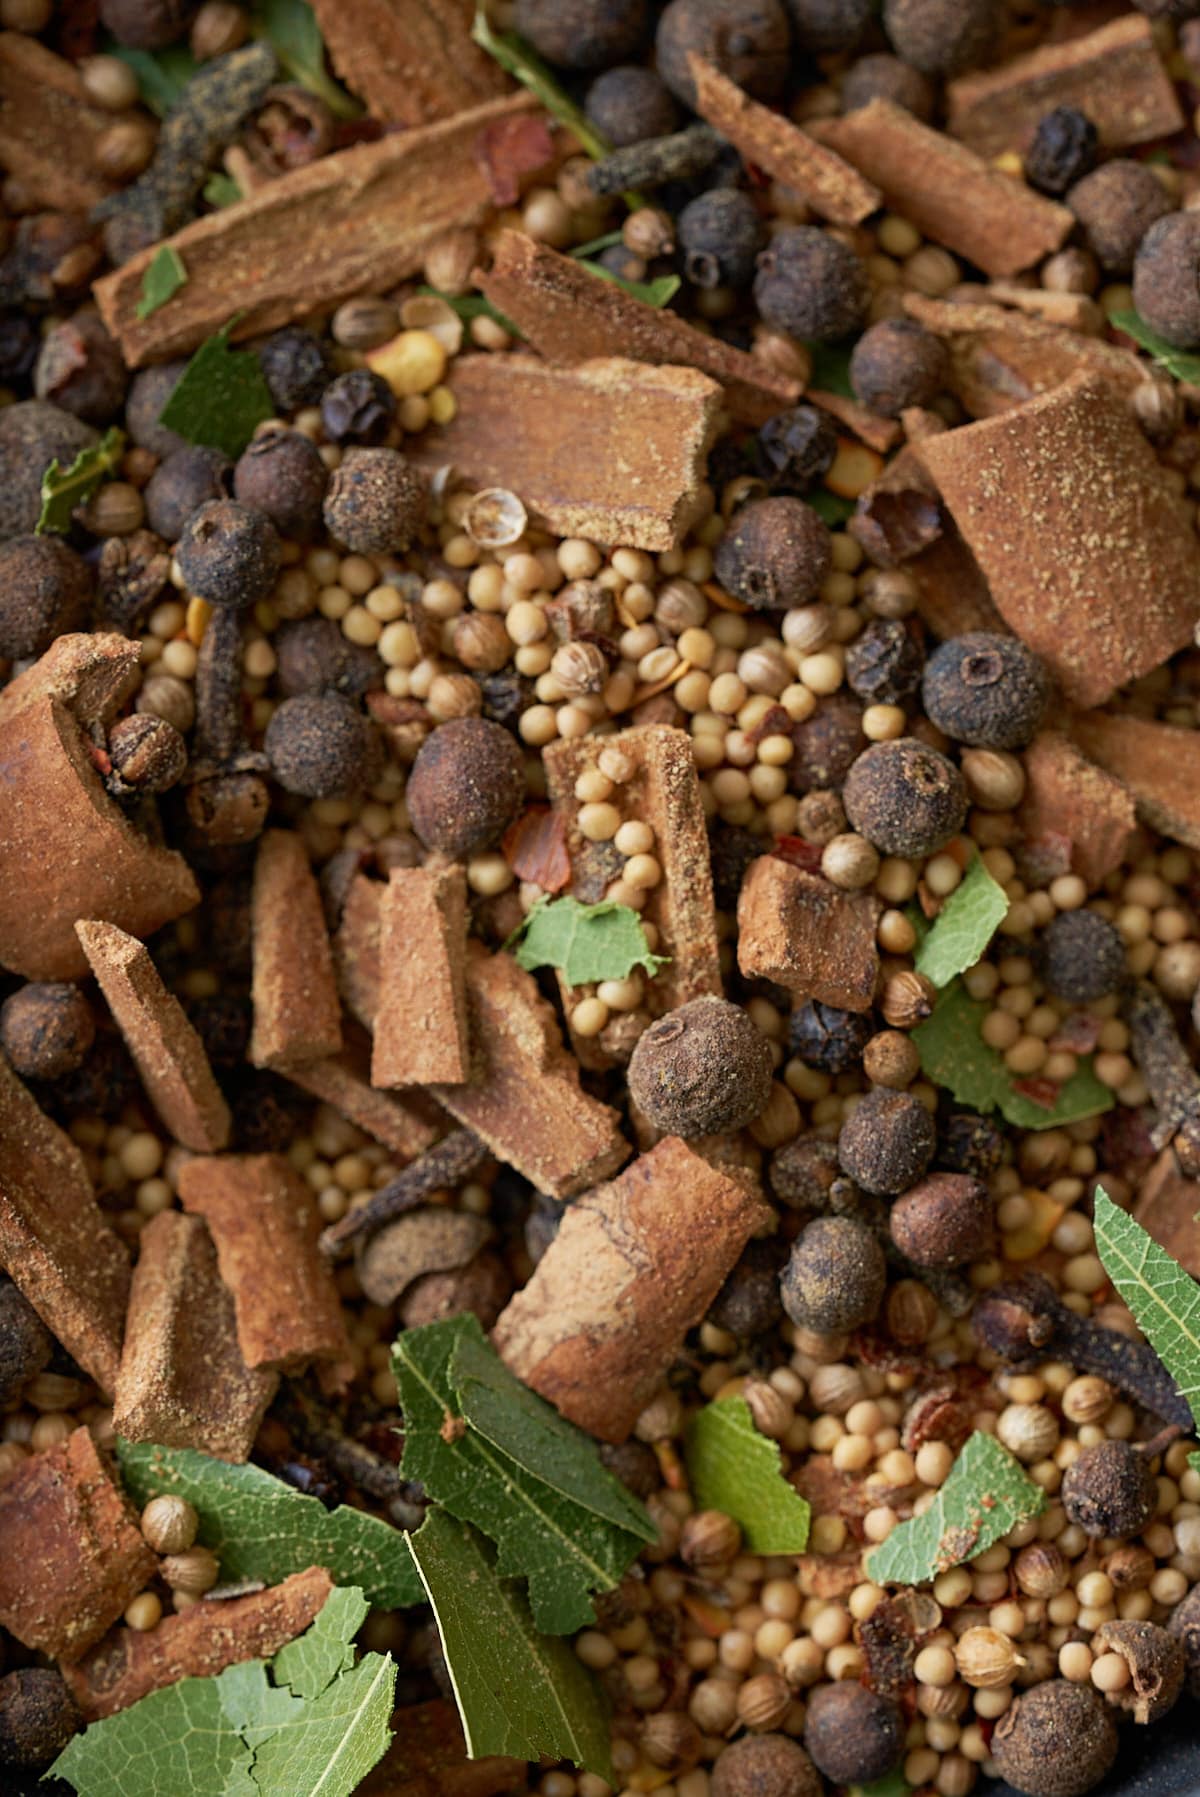 Whole spices including allspice berries, mustard seeds, black peppercorns, cloves, crushed cinnamon sticks, bay leaves and coriander seeds, set on a wooden board.